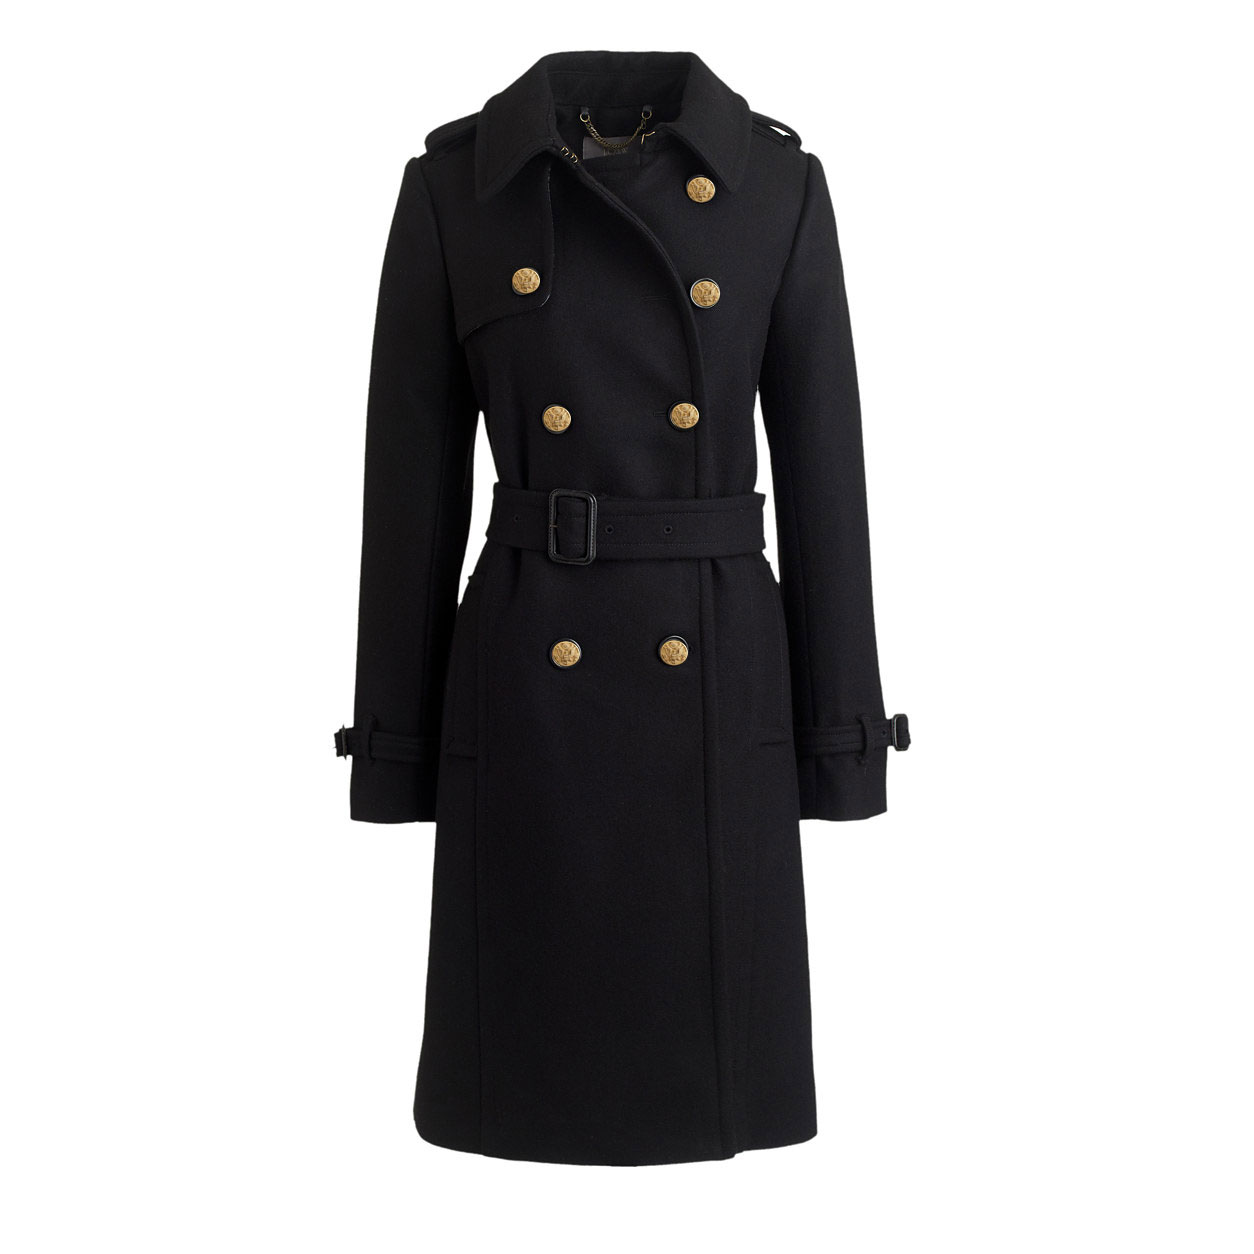 J.Crew Icon Trench in Wool Cashmere Black